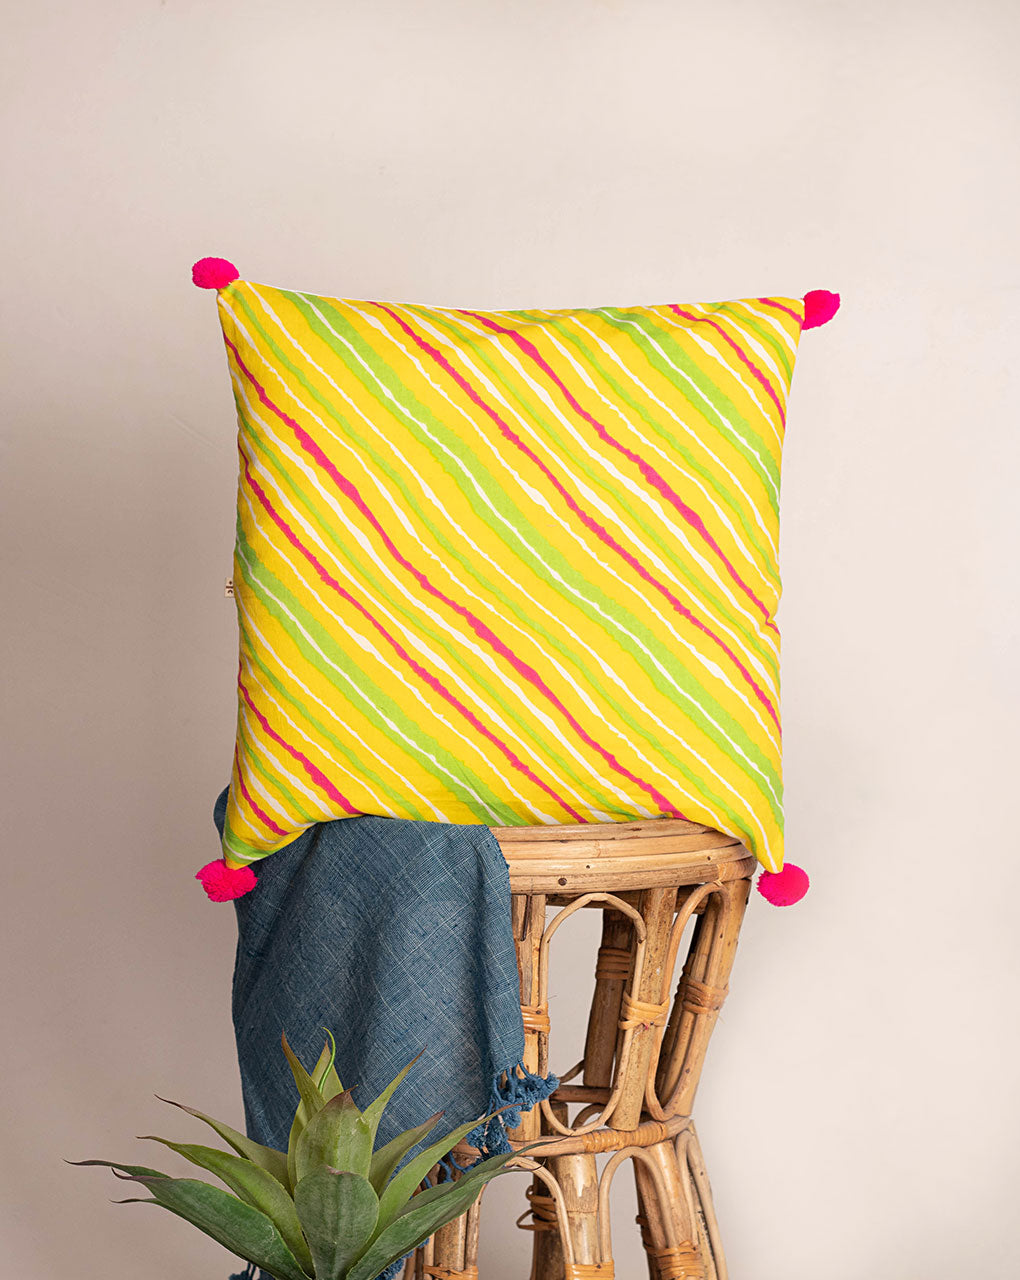 Hand Crafted Cotton Cushion Cover ( 16X16 Inches ) - Fabriclore.com